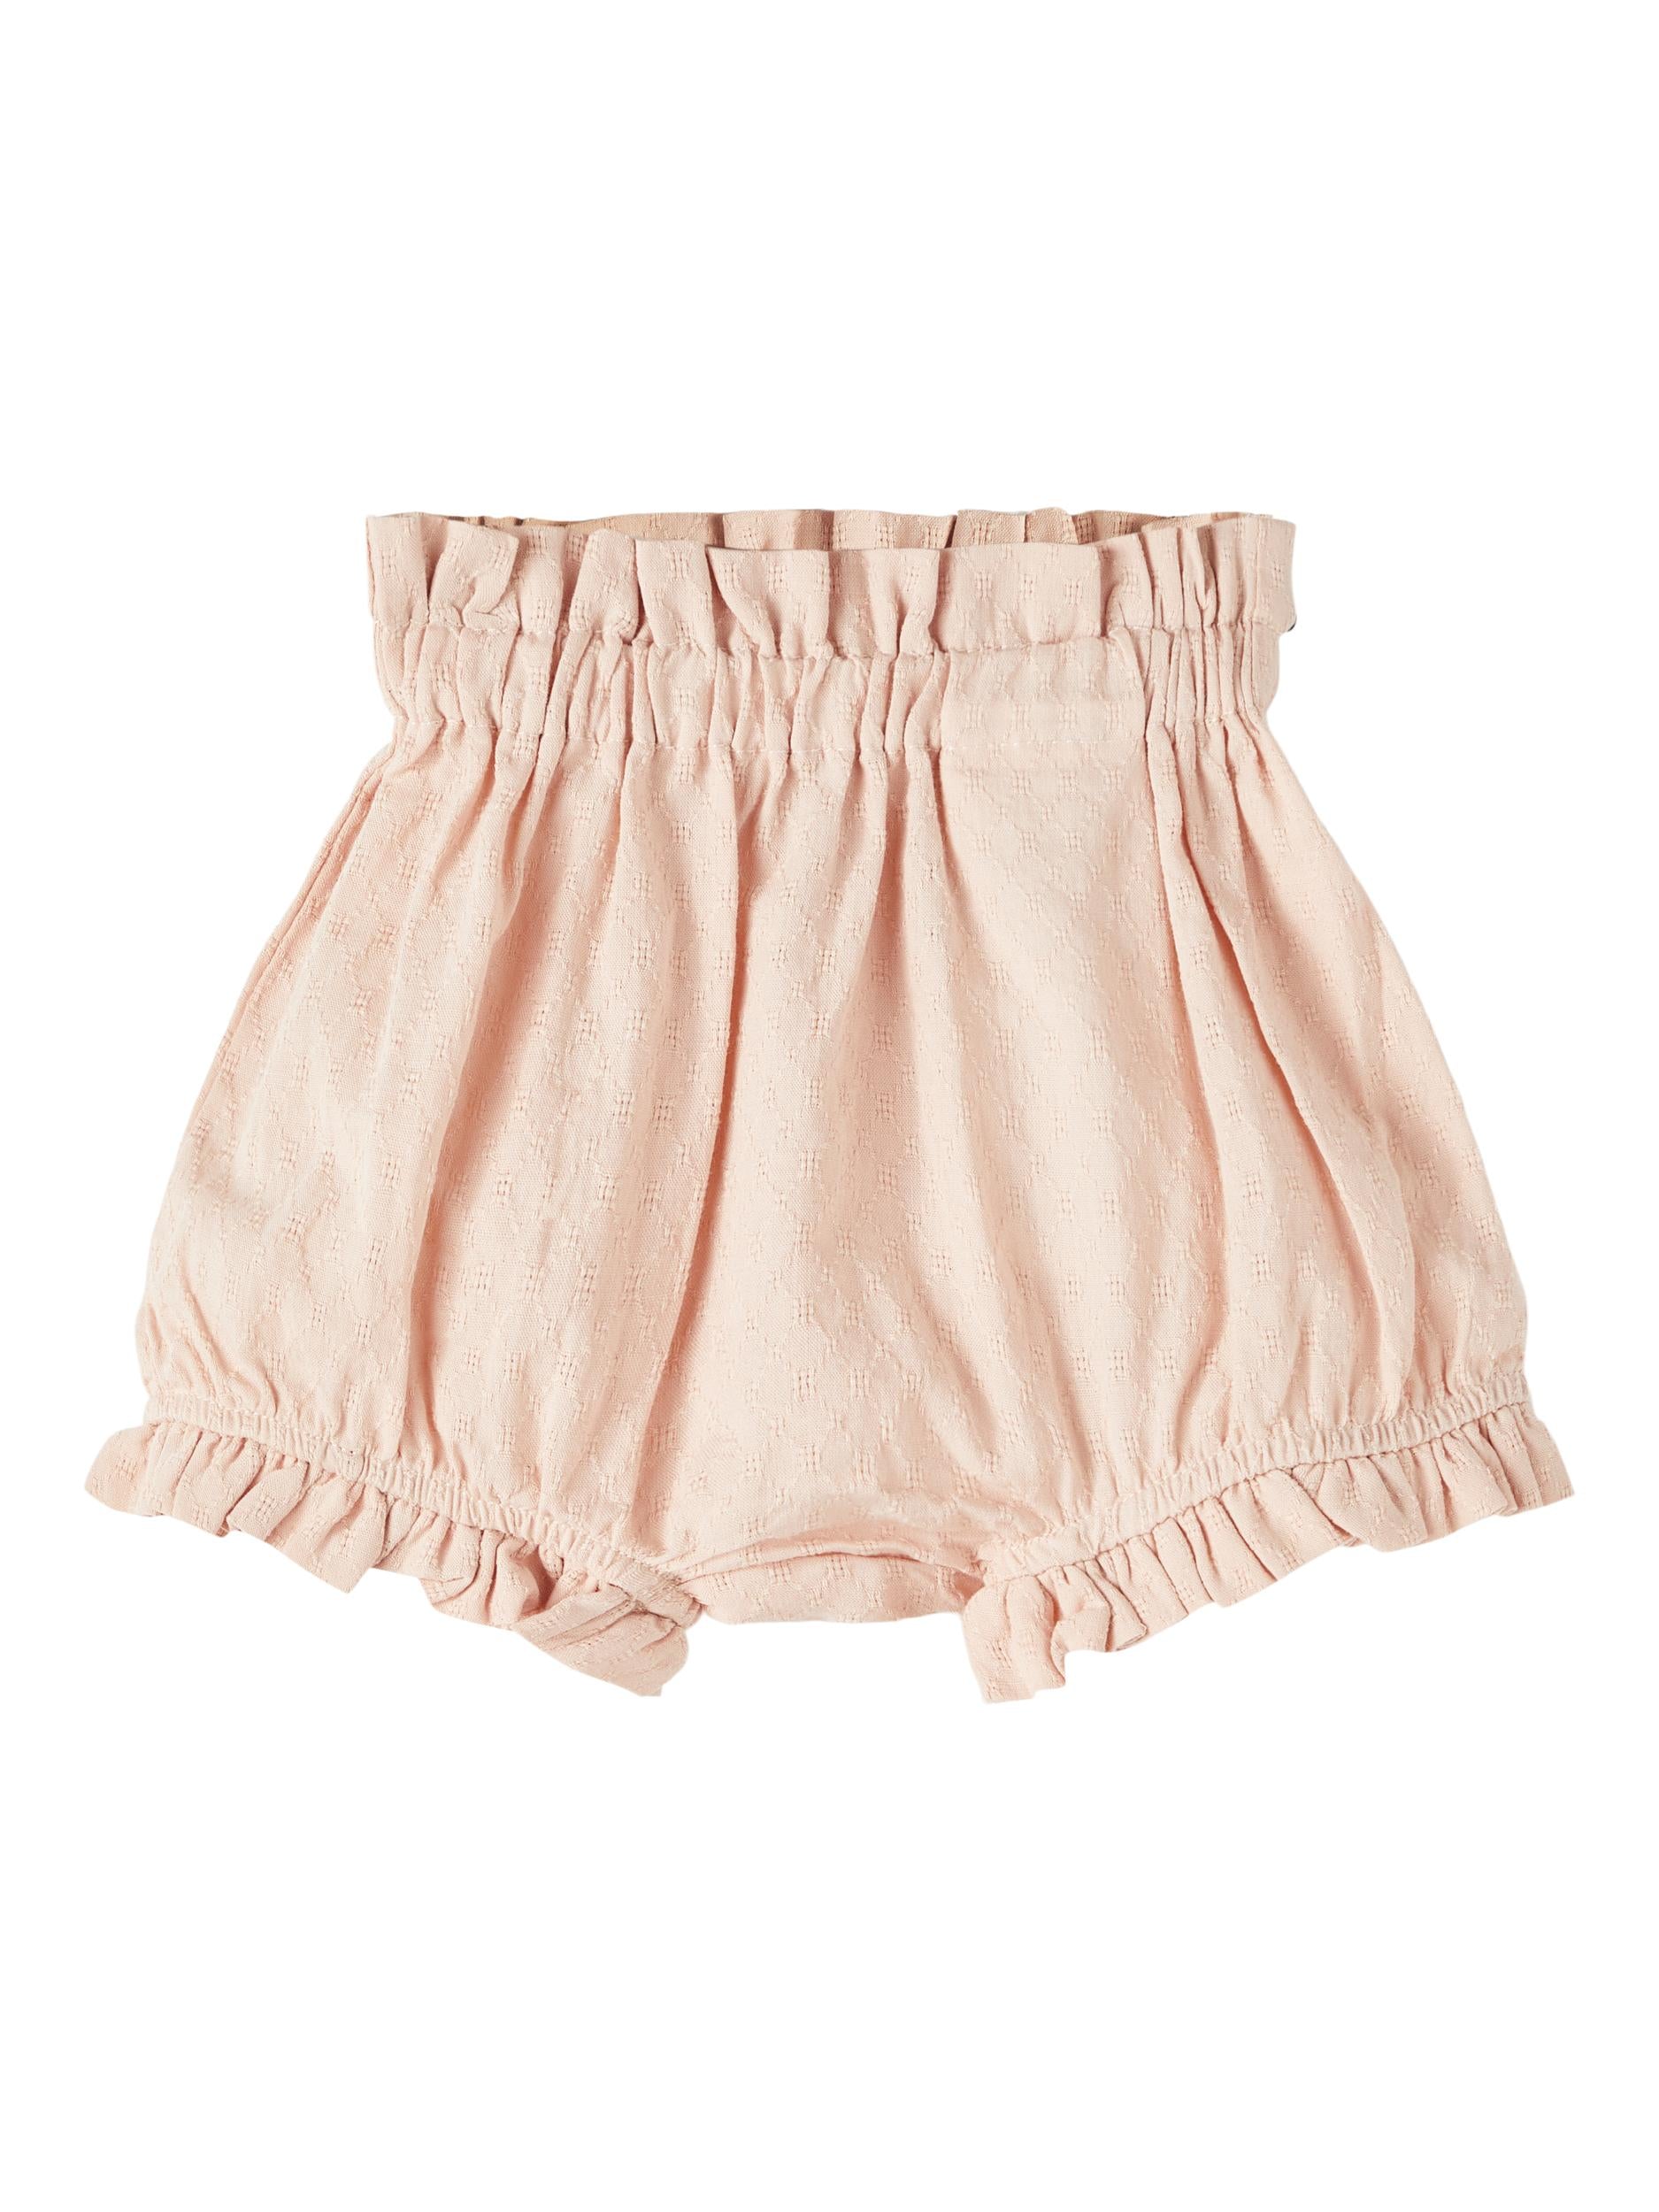 Lil Atelier Dolly Bloomers - Rose Dust